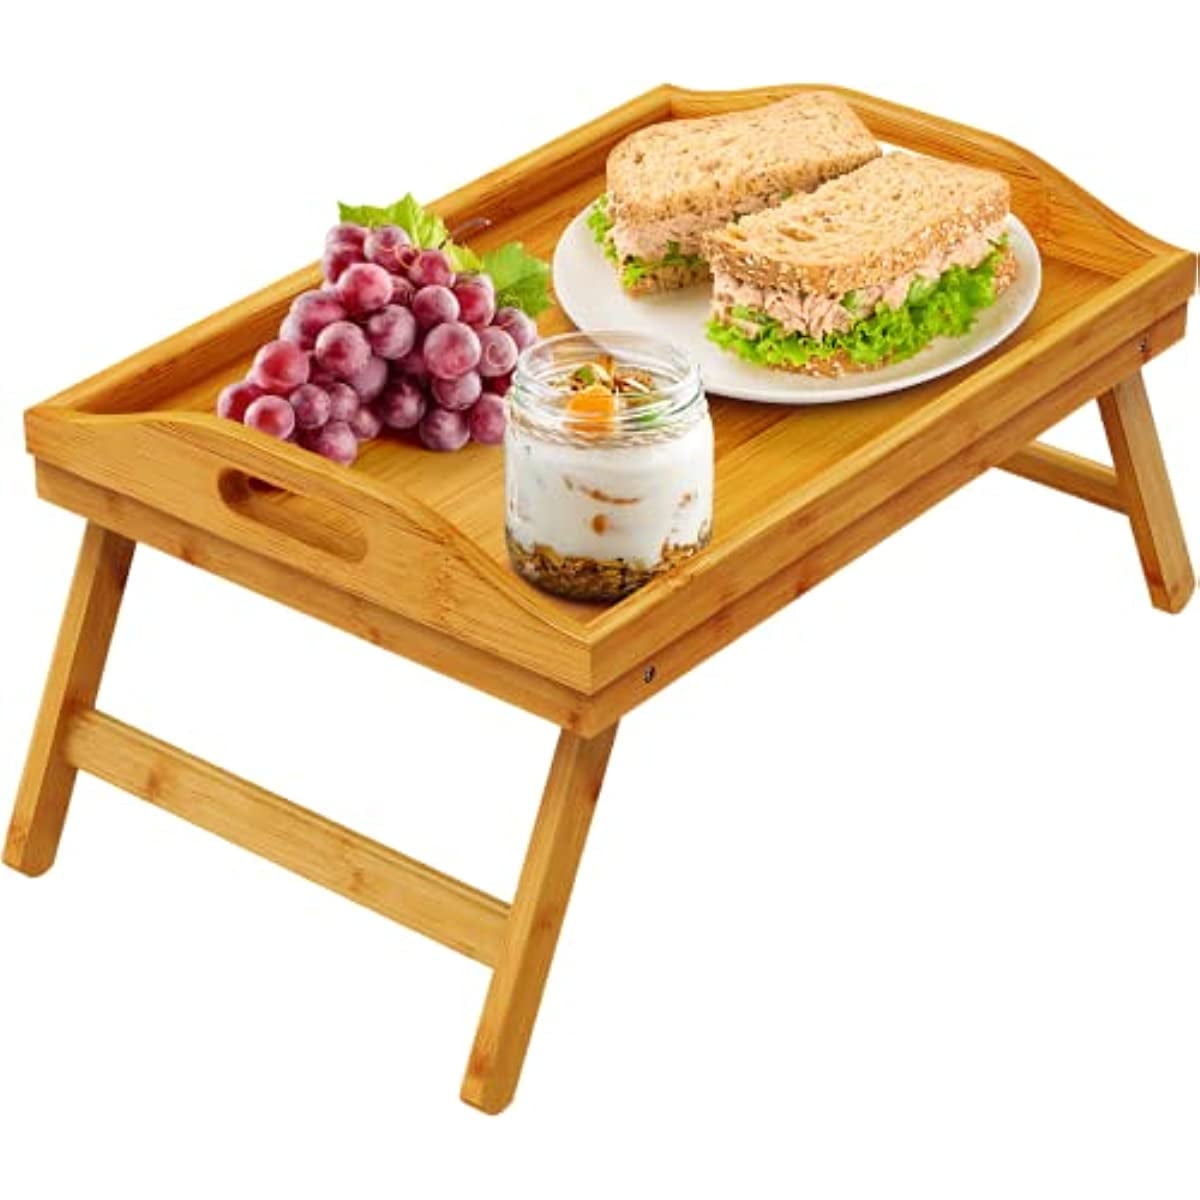 3 Pcs Acacia Bed Table Tray with Folding Legs and Handles Wooden Breakfast  Tray Lap Snack Serving Tray Wood Laptop Desk for Eating Drawing Working